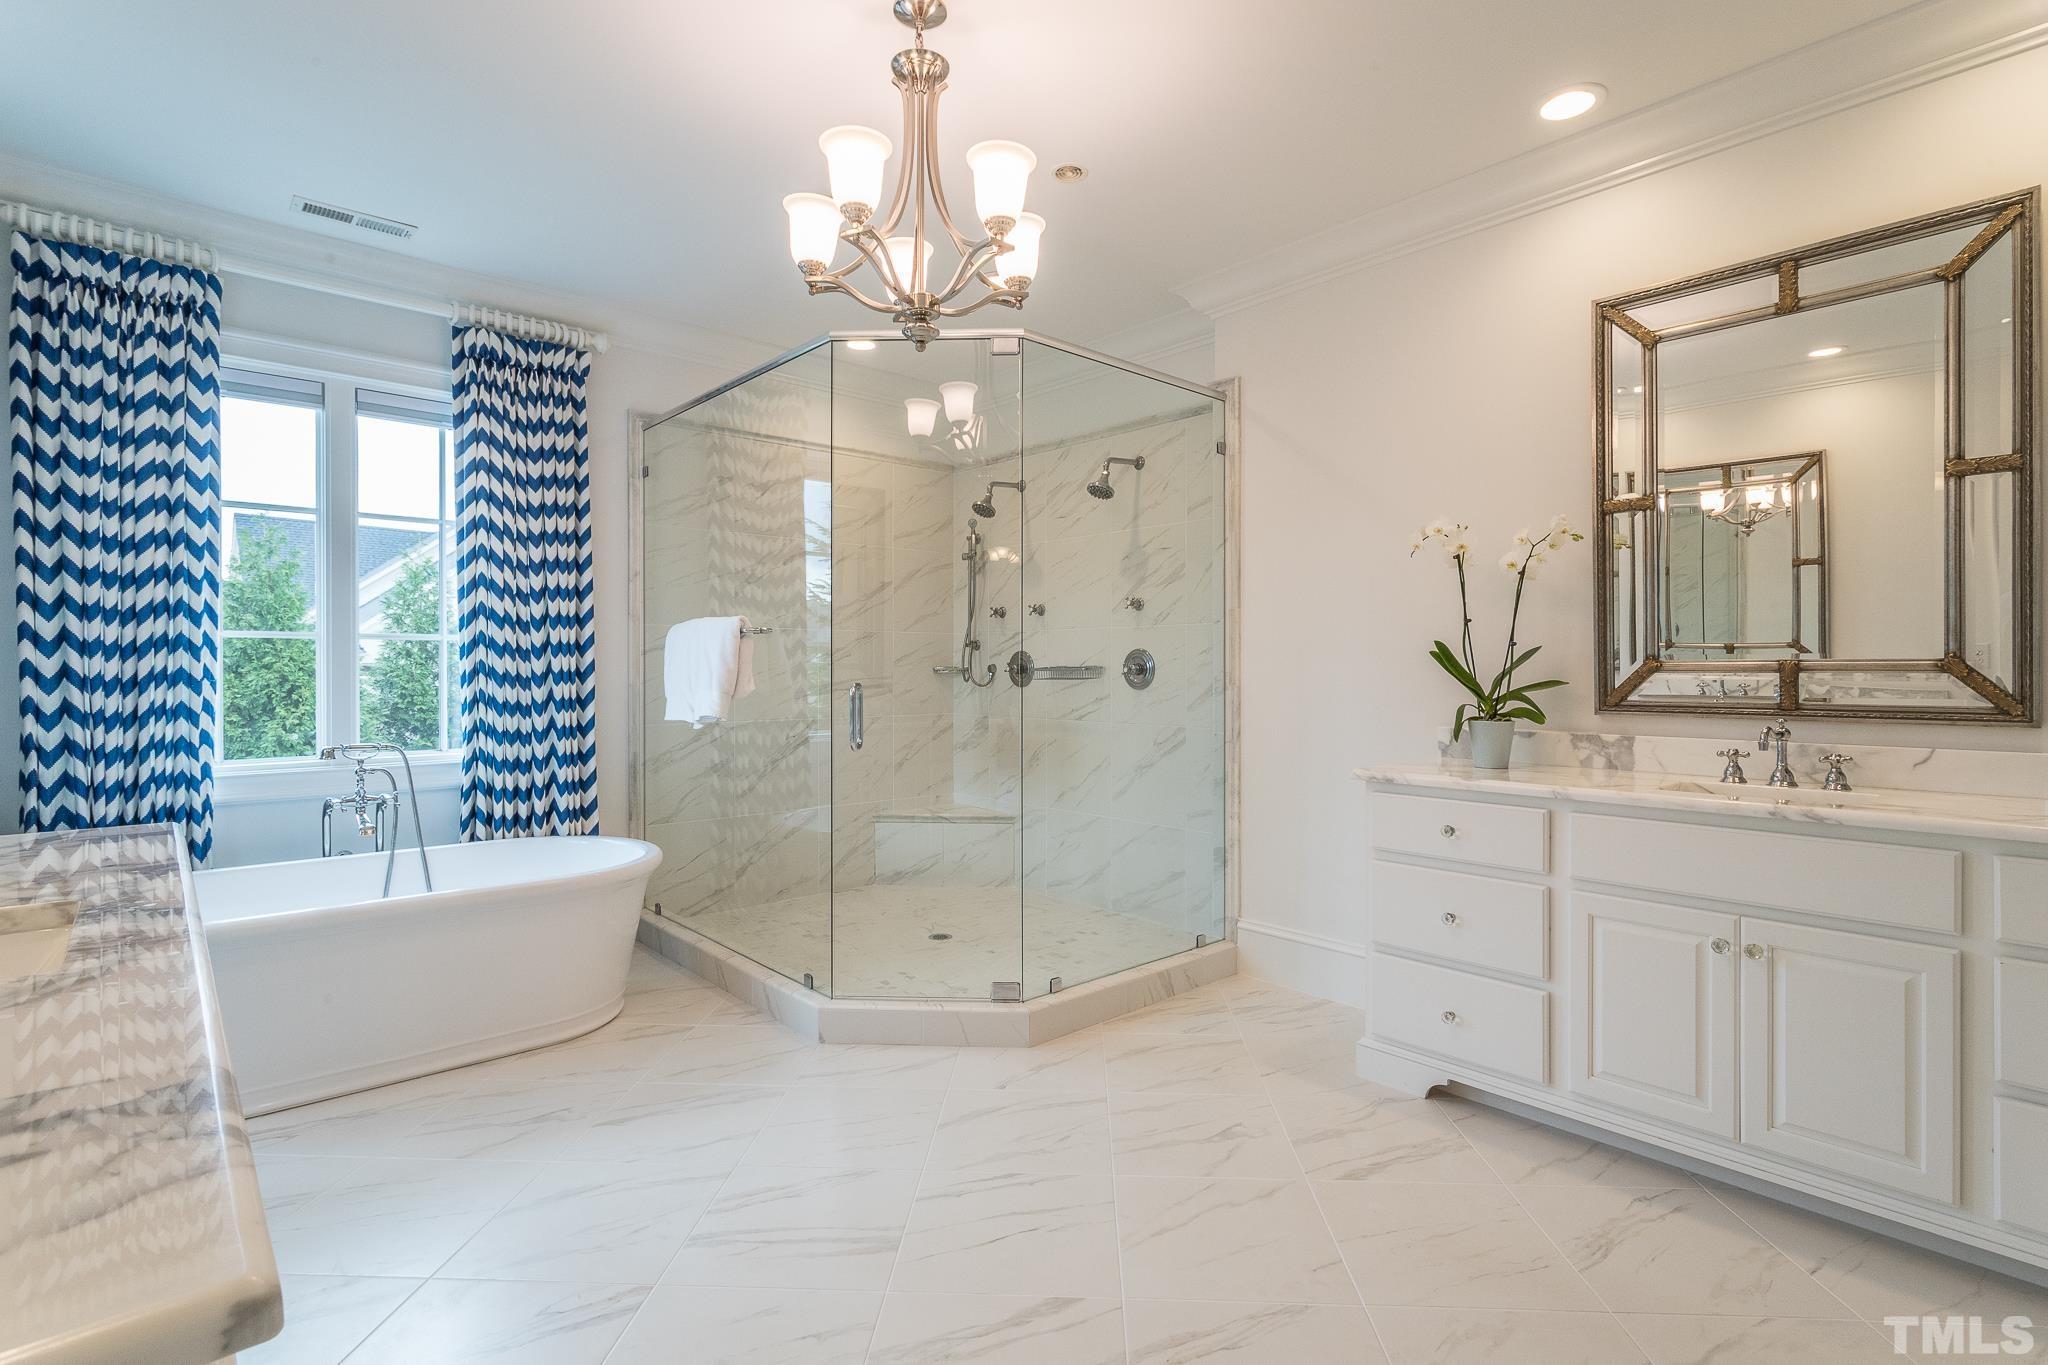 Luxurious and Spacious Owner's Bath